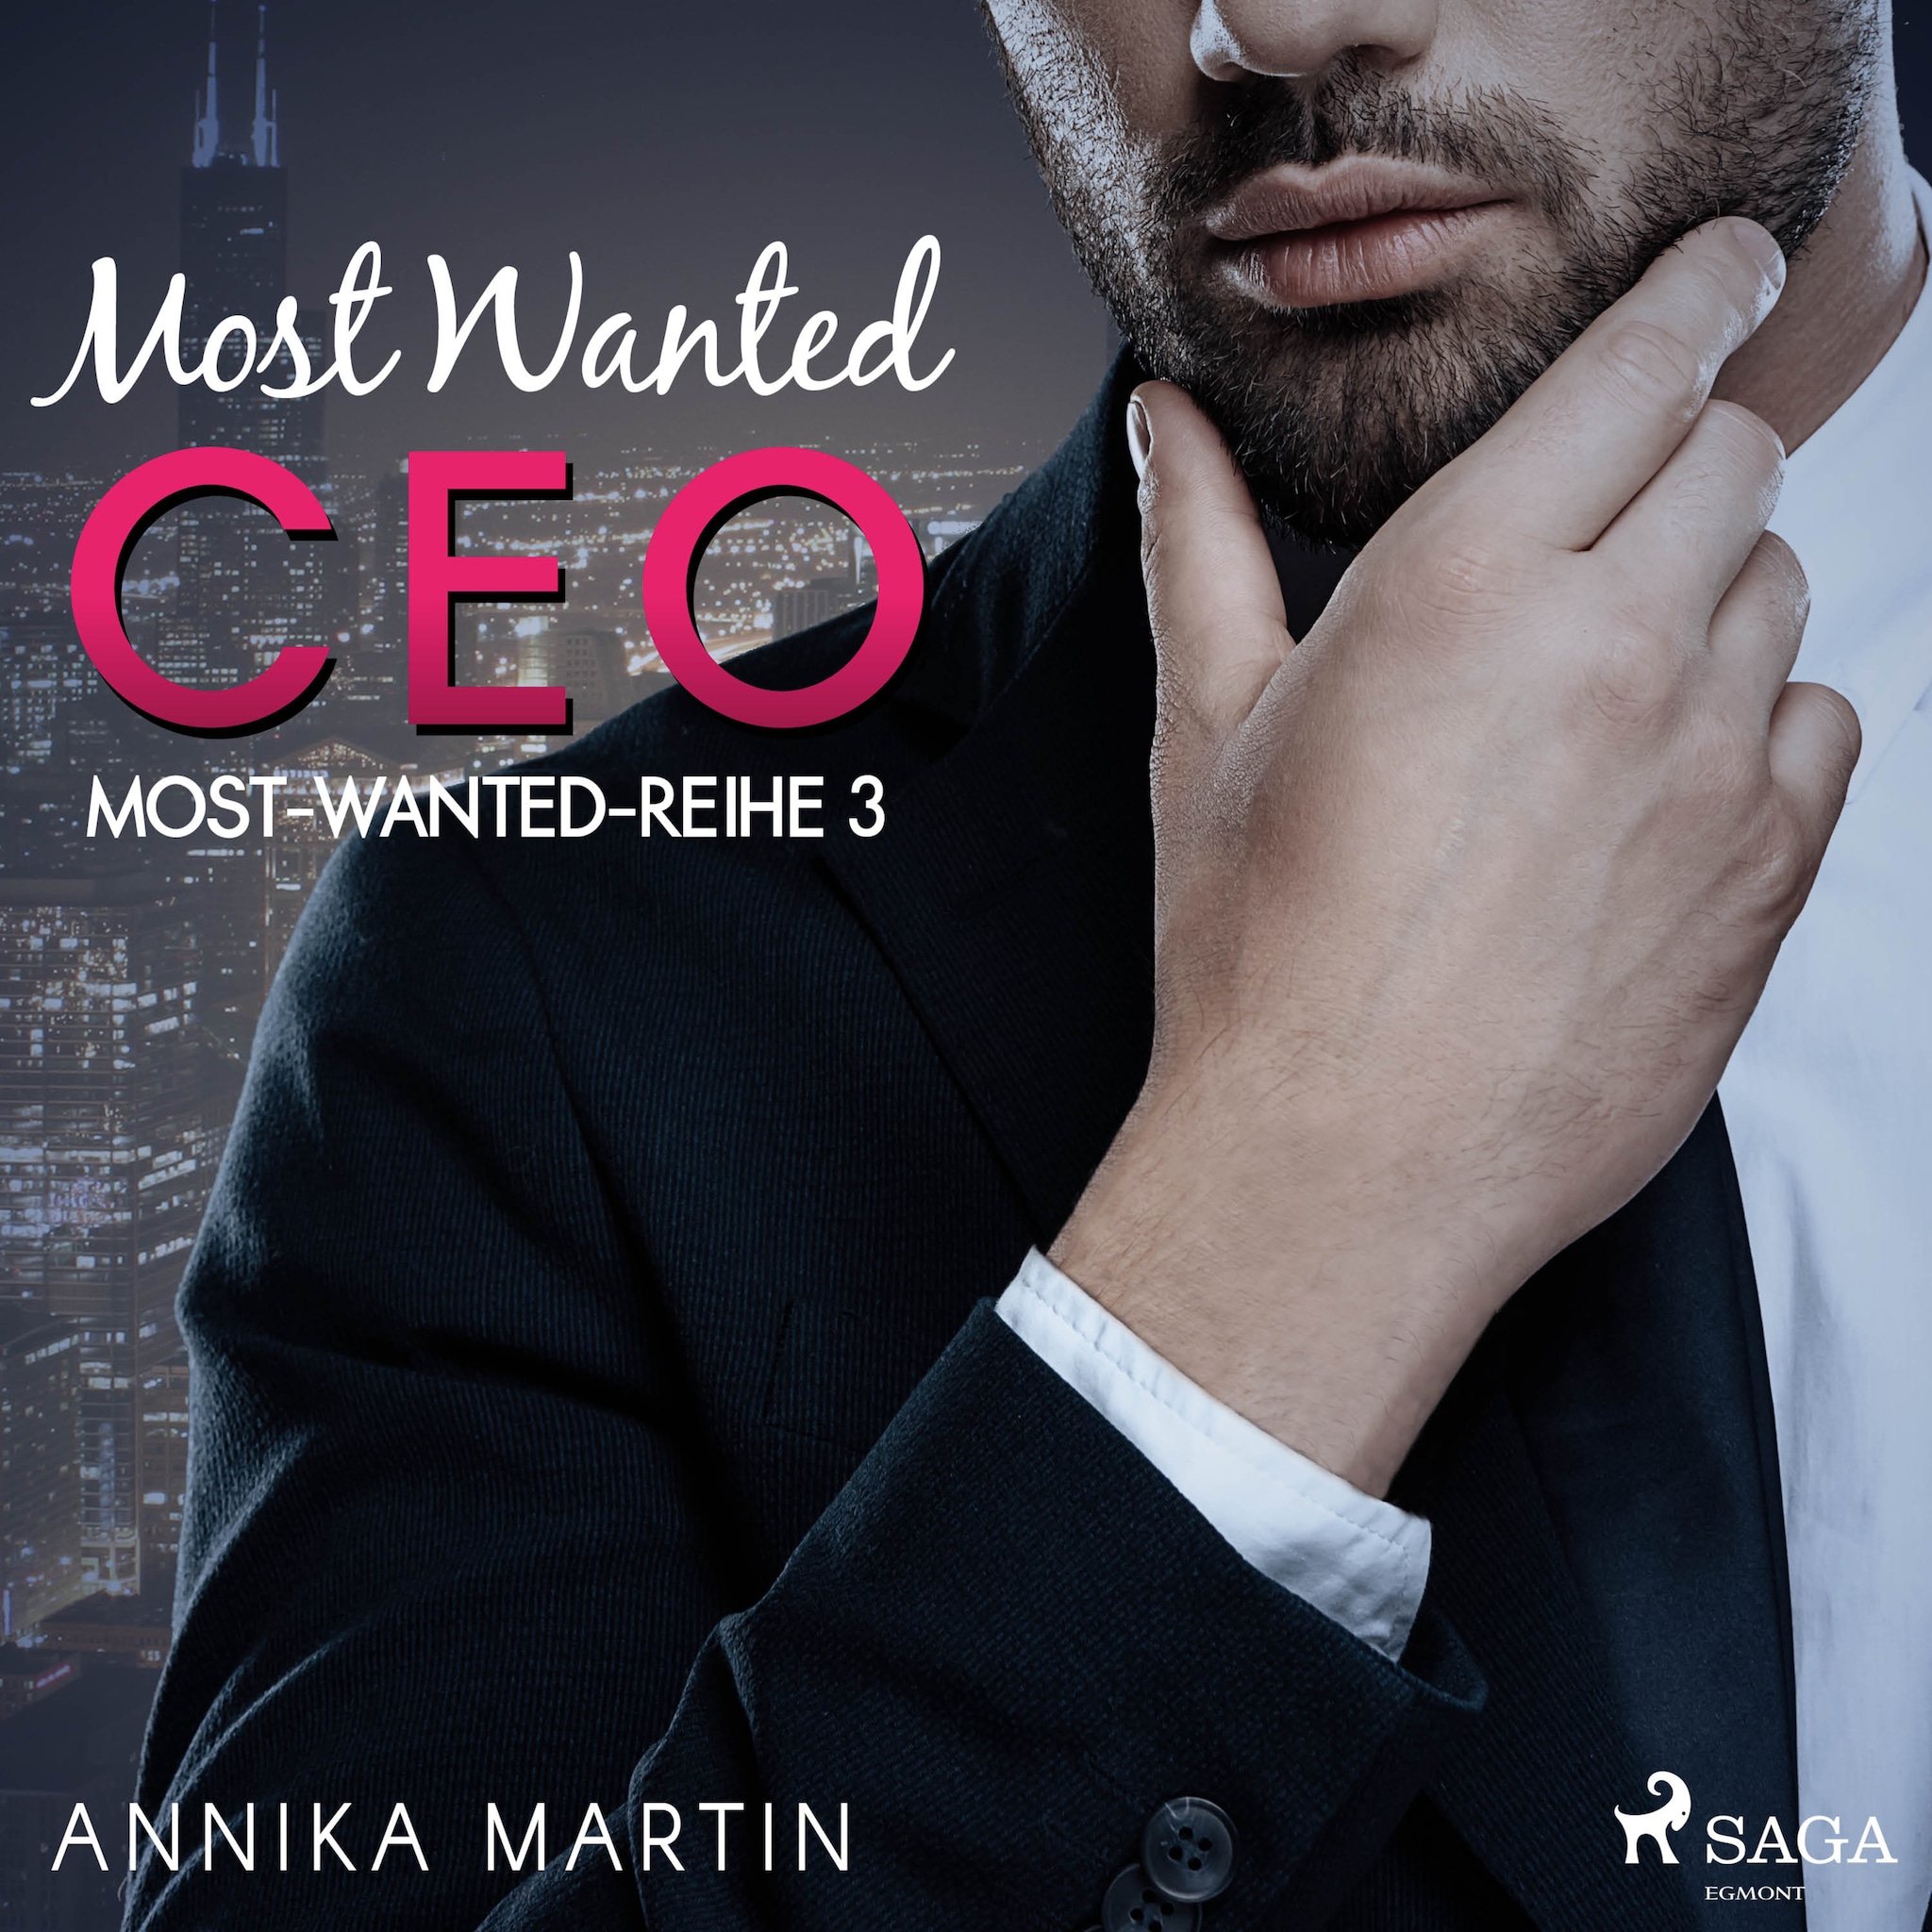 Most Wanted CEO (Most-Wanted-Reihe 3) ilmaiseksi